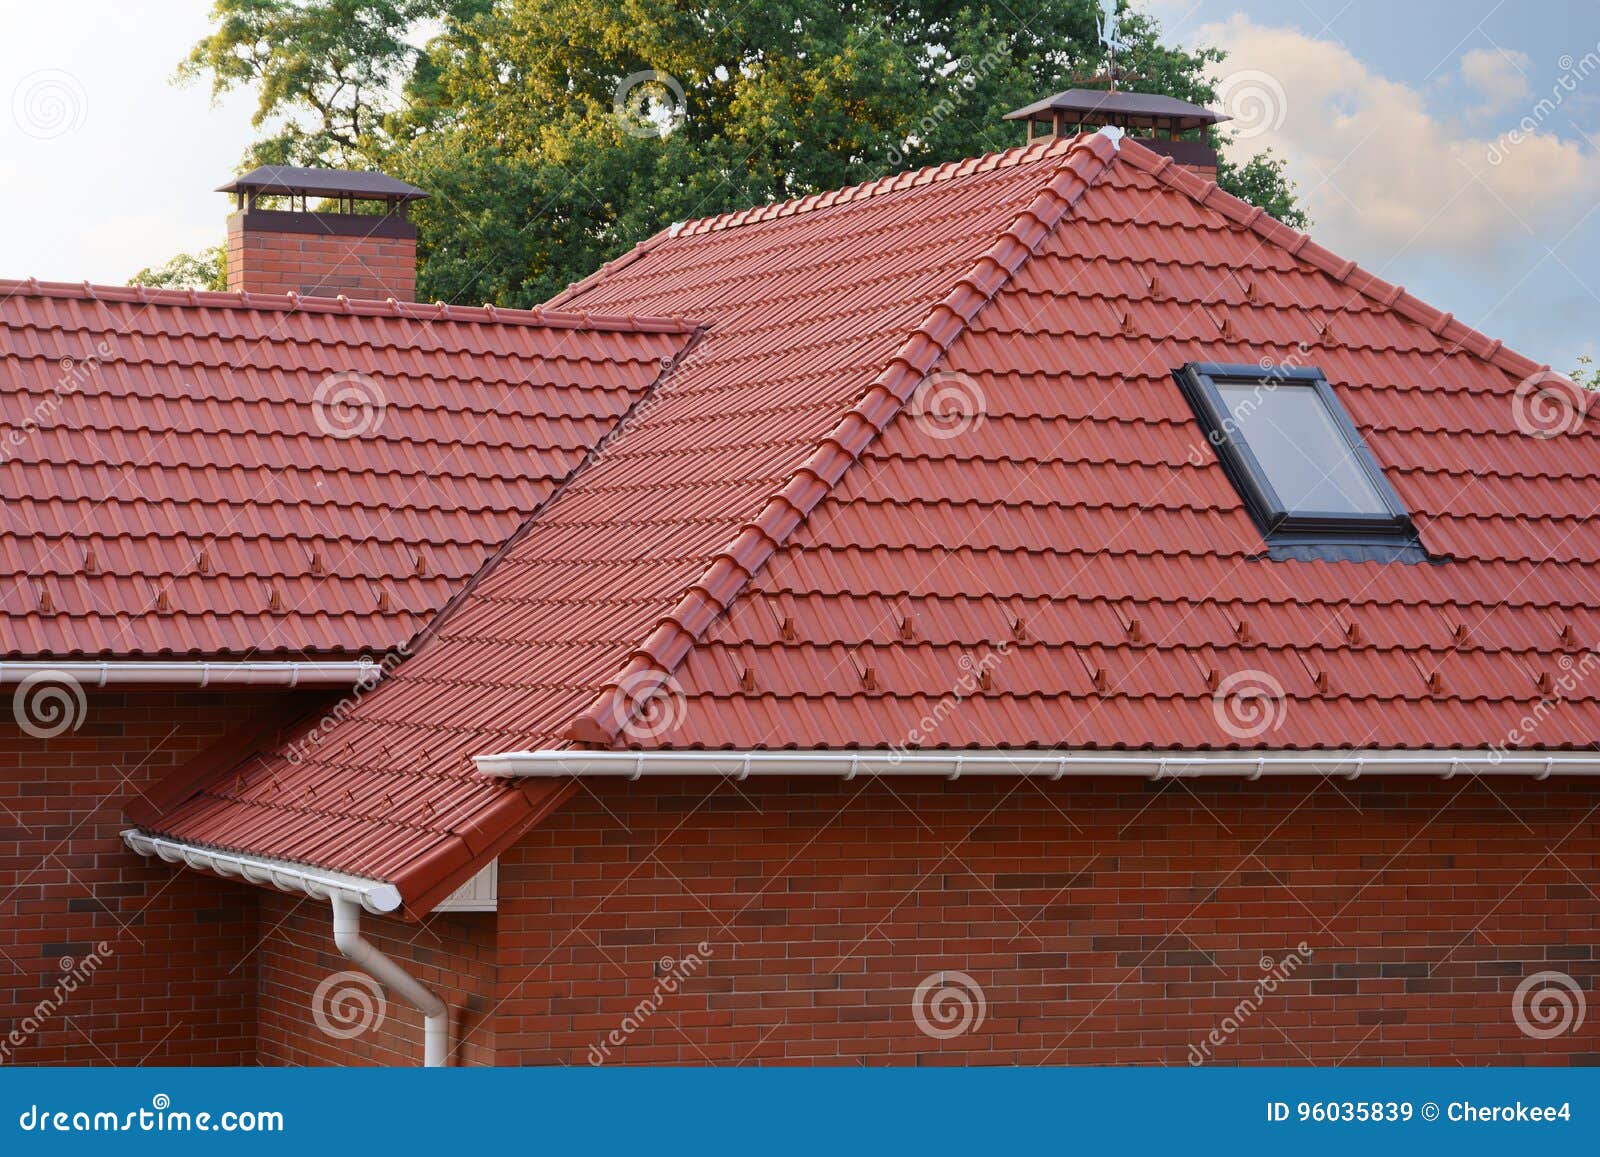 new red shingles roof with skylights windows and rain gutter. new brick house with chimney